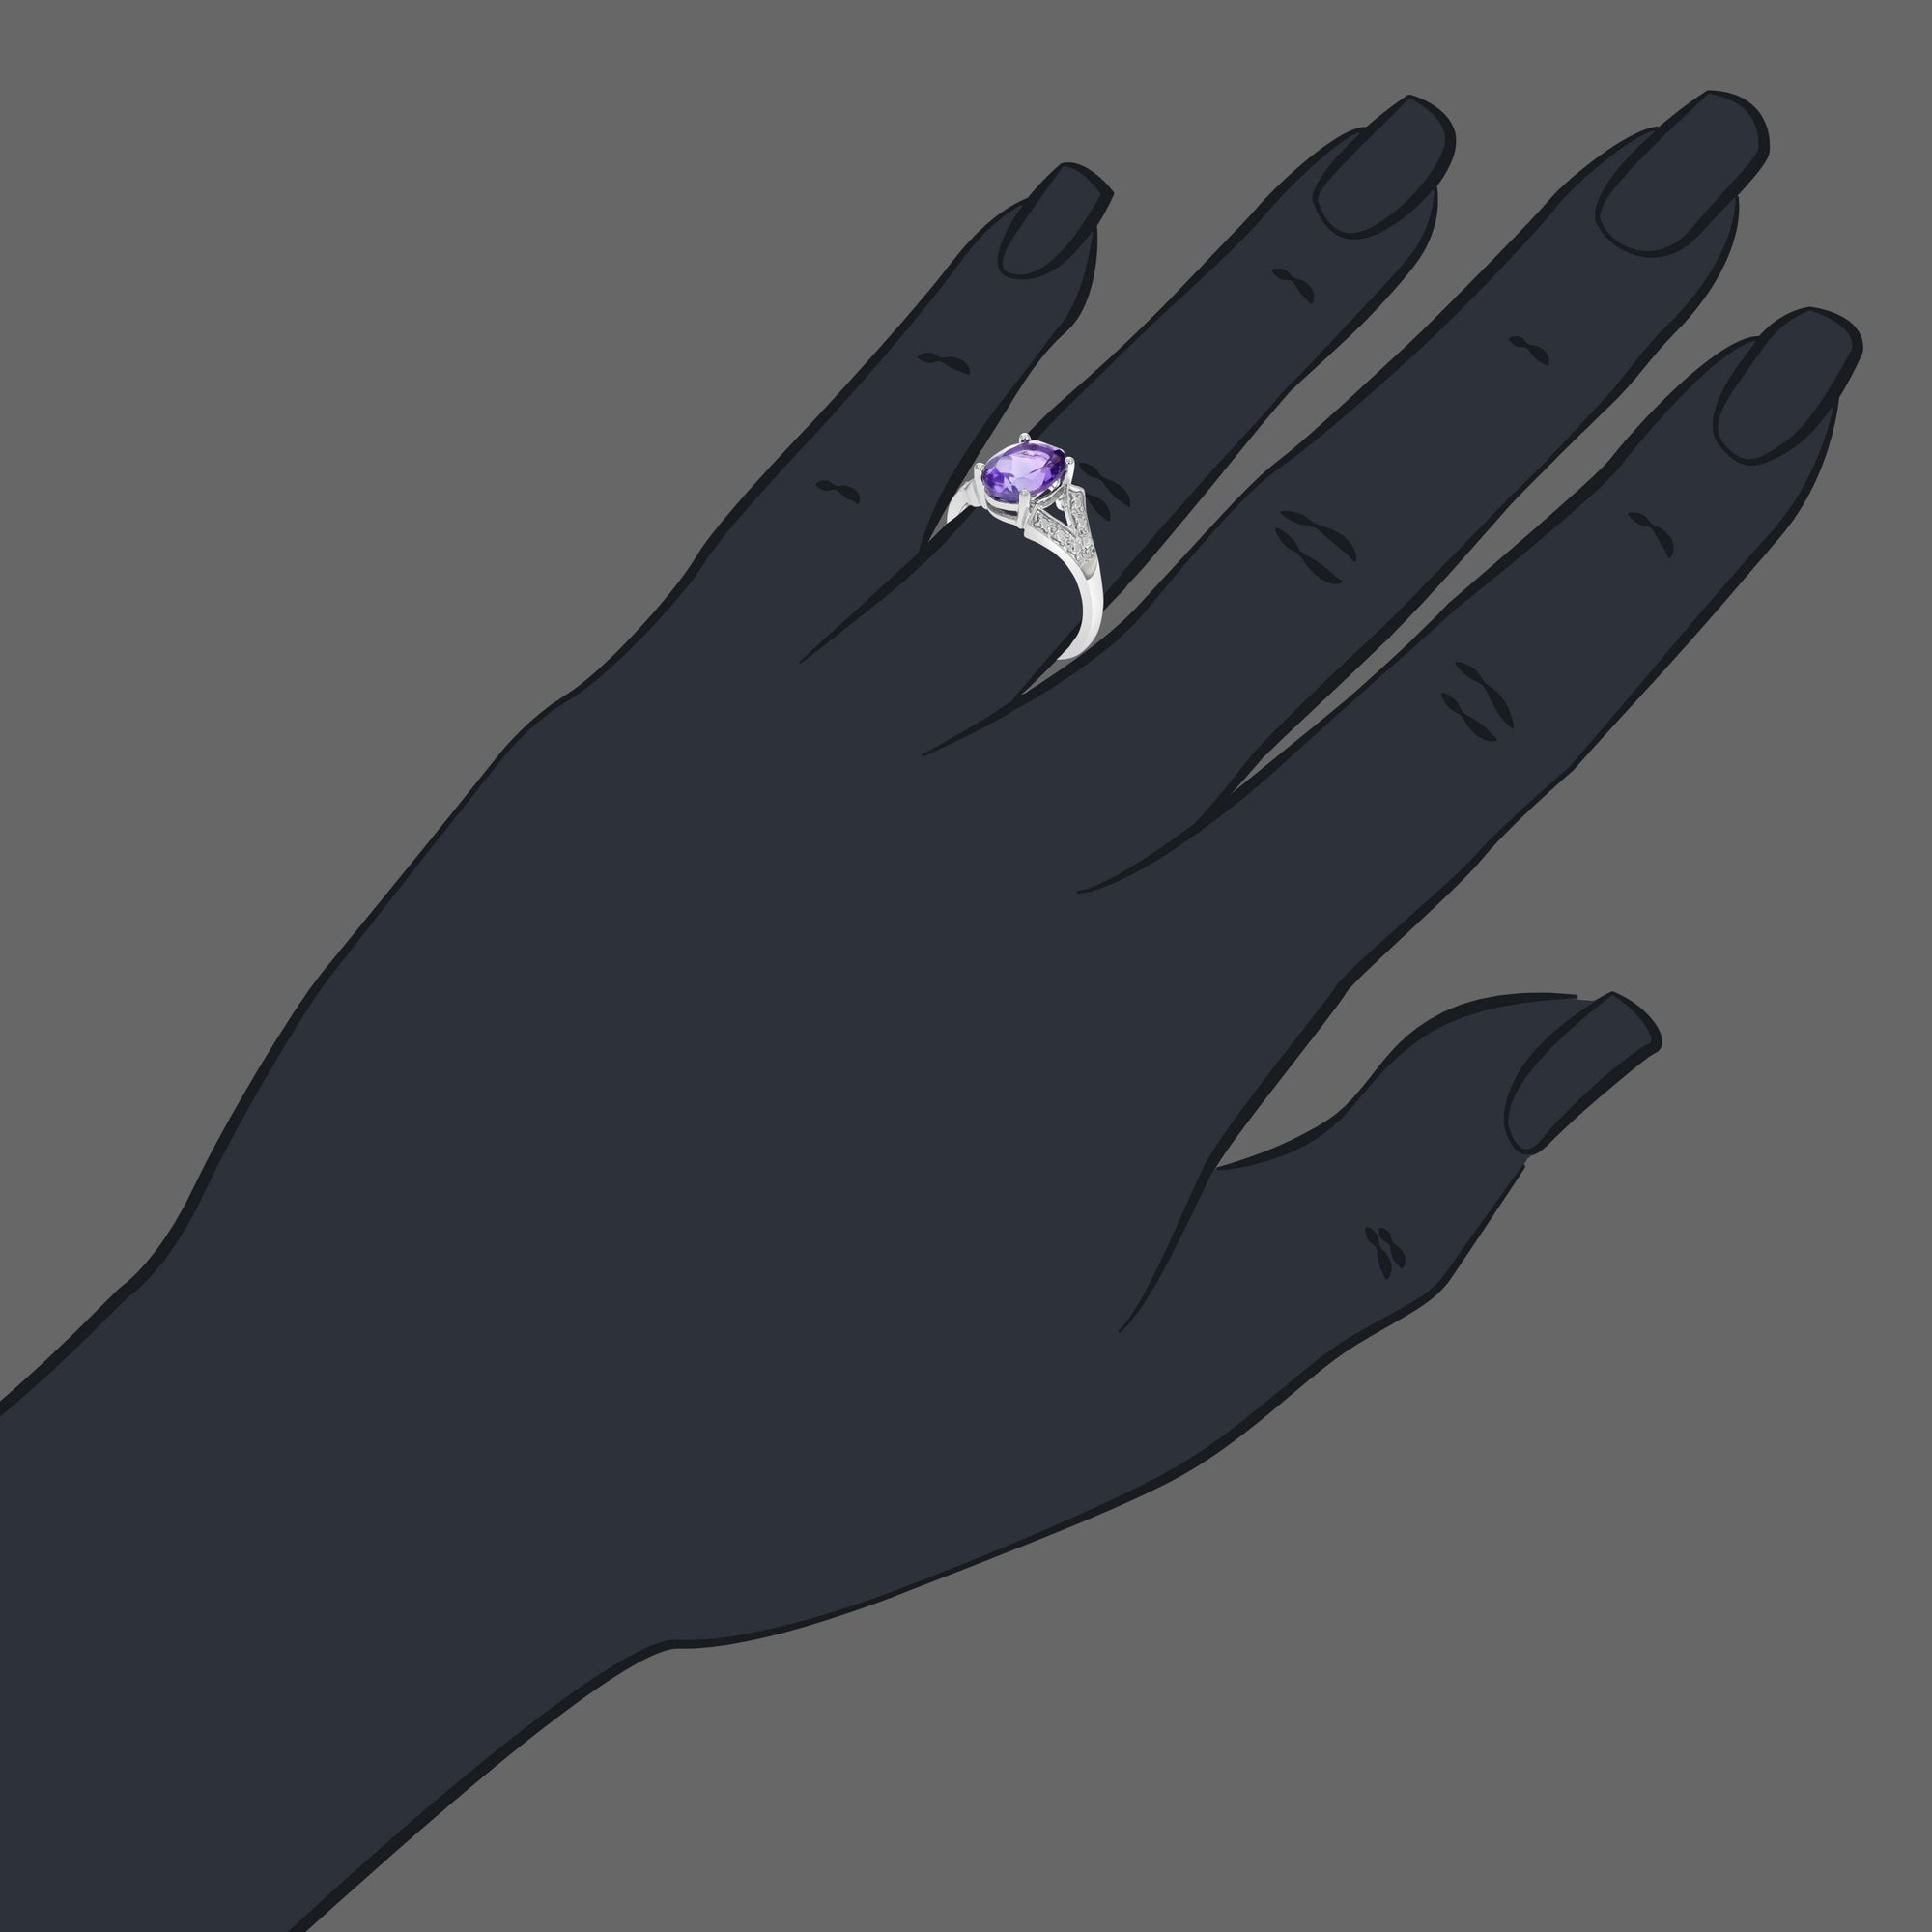 1.70 cttw Purple Amethyst Ring .925 Sterling Silver with Rhodium Oval 9x7 MM